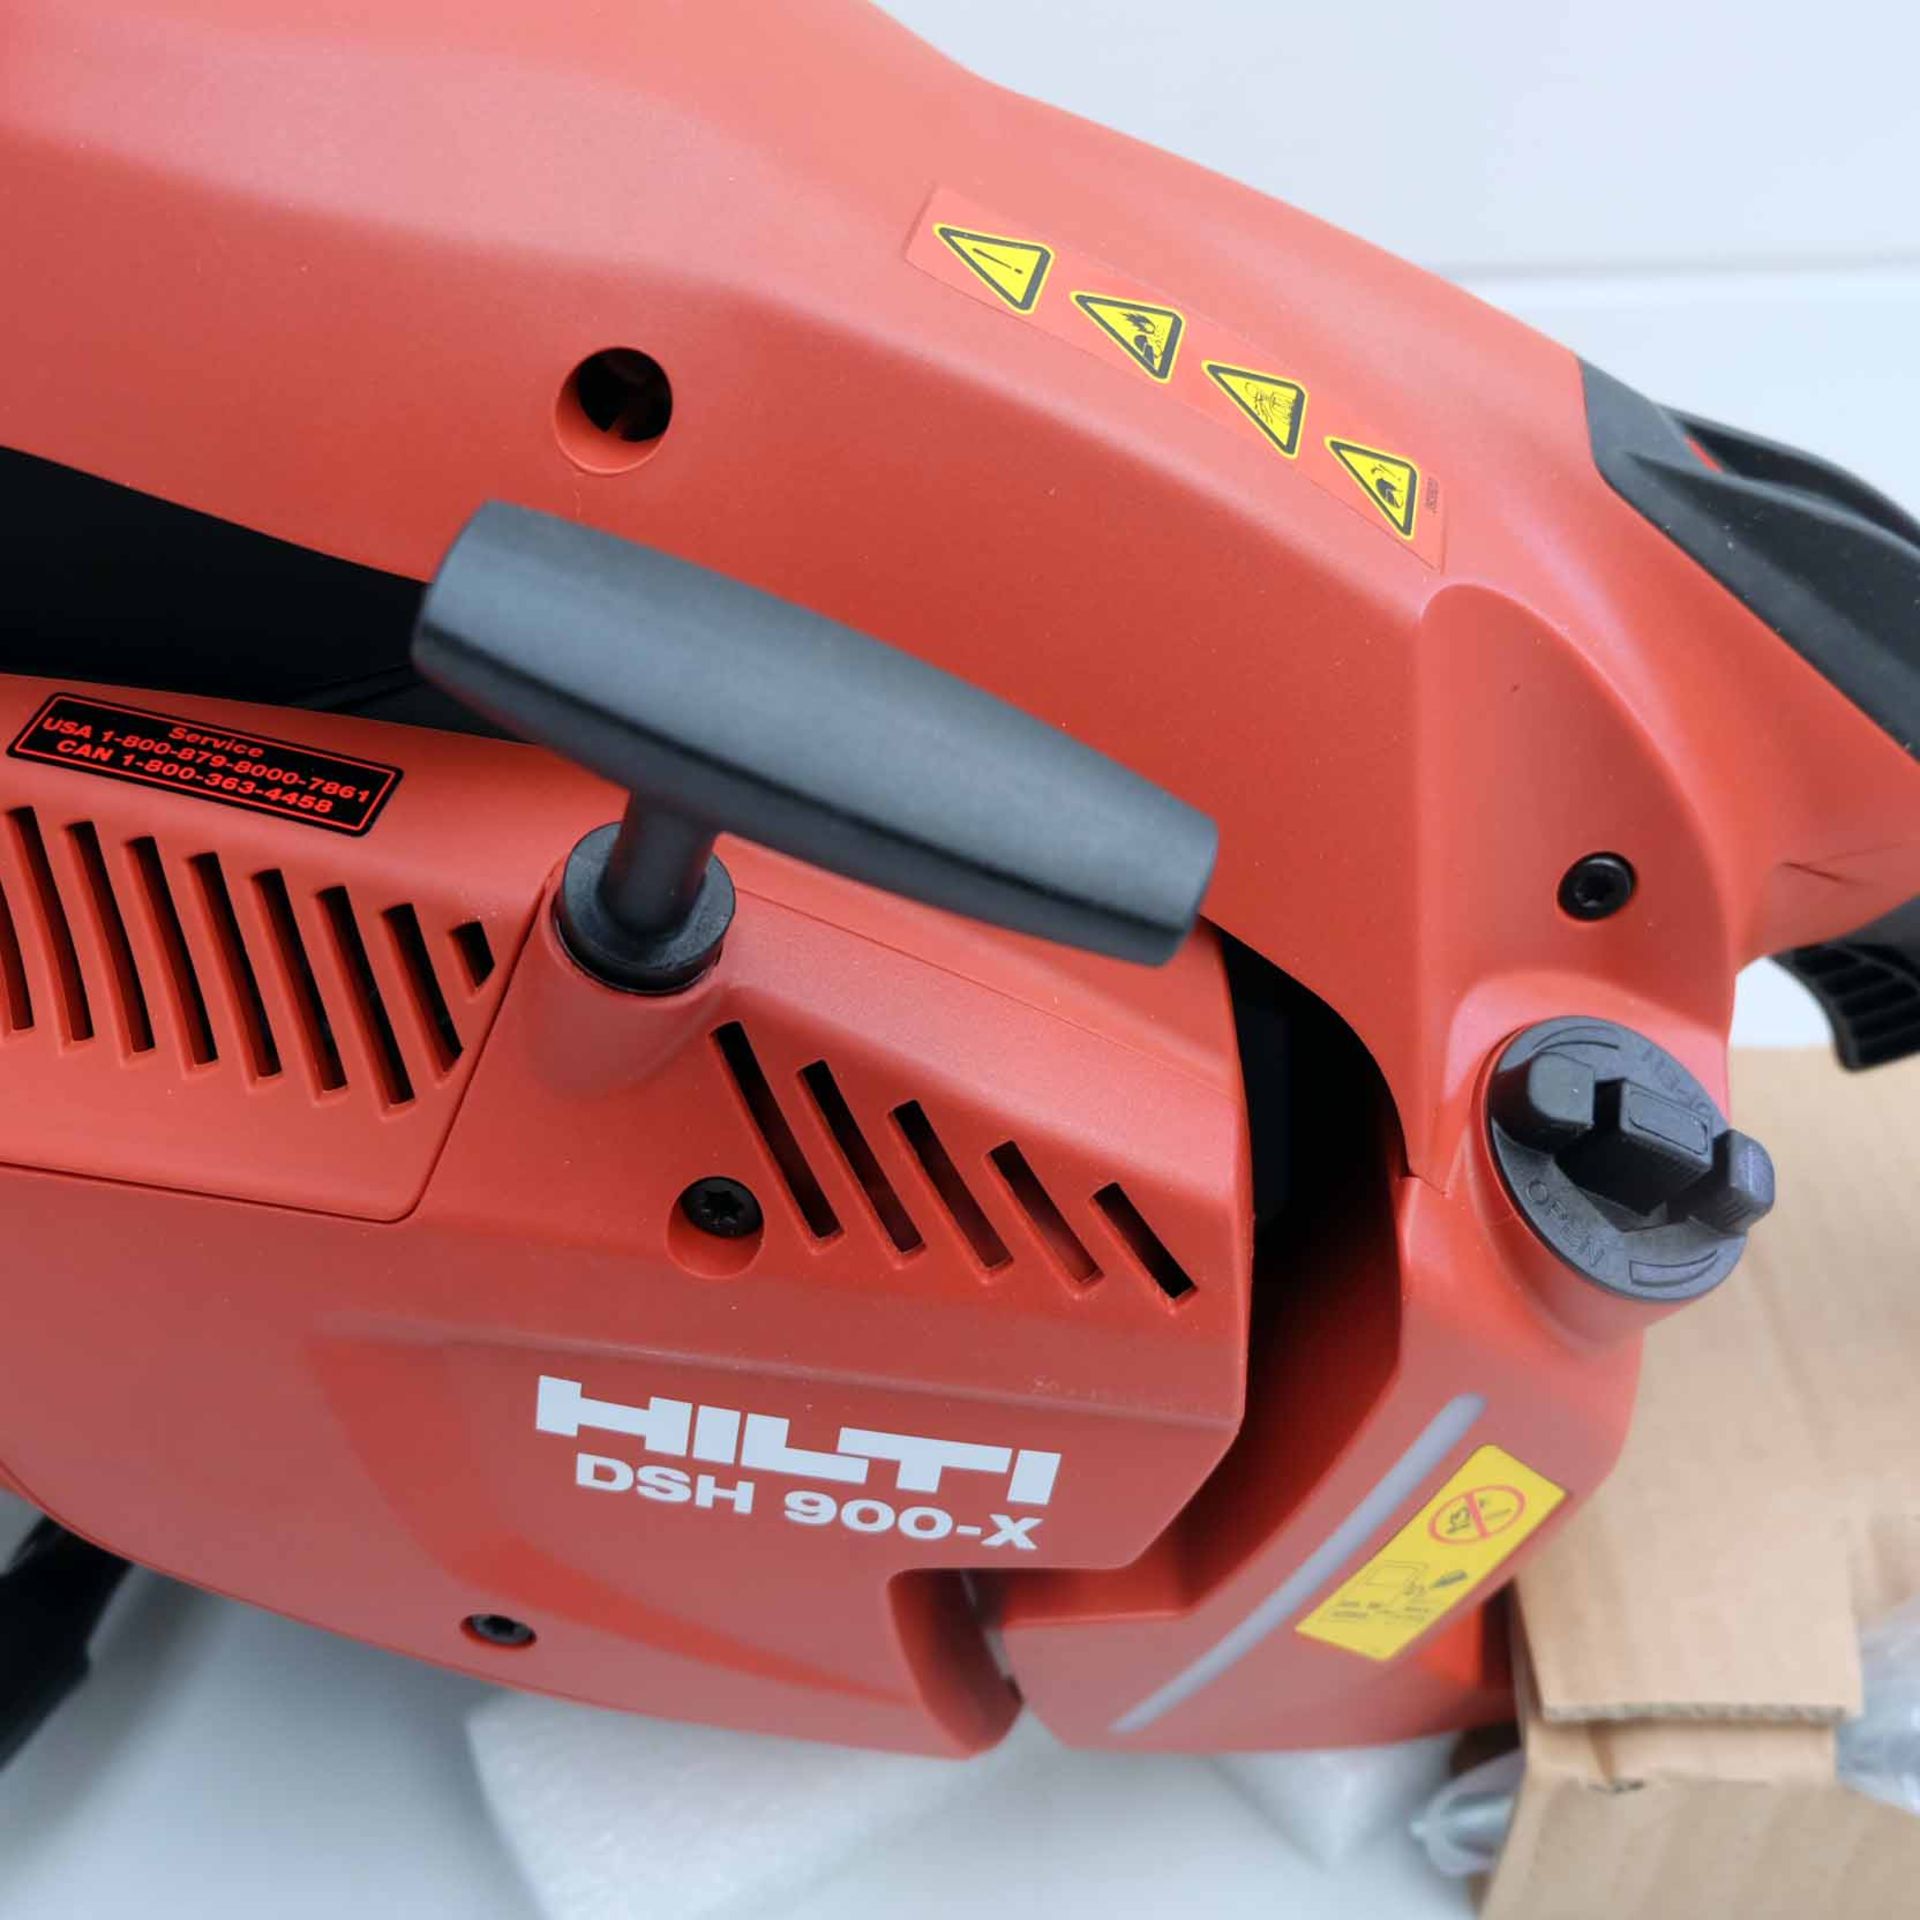 Hilti Hand Held Gas Saw. Model DSH 900-X 16". Complete With SP-16"x1" Blade. Easy Start Auto-Choke S - Image 12 of 22